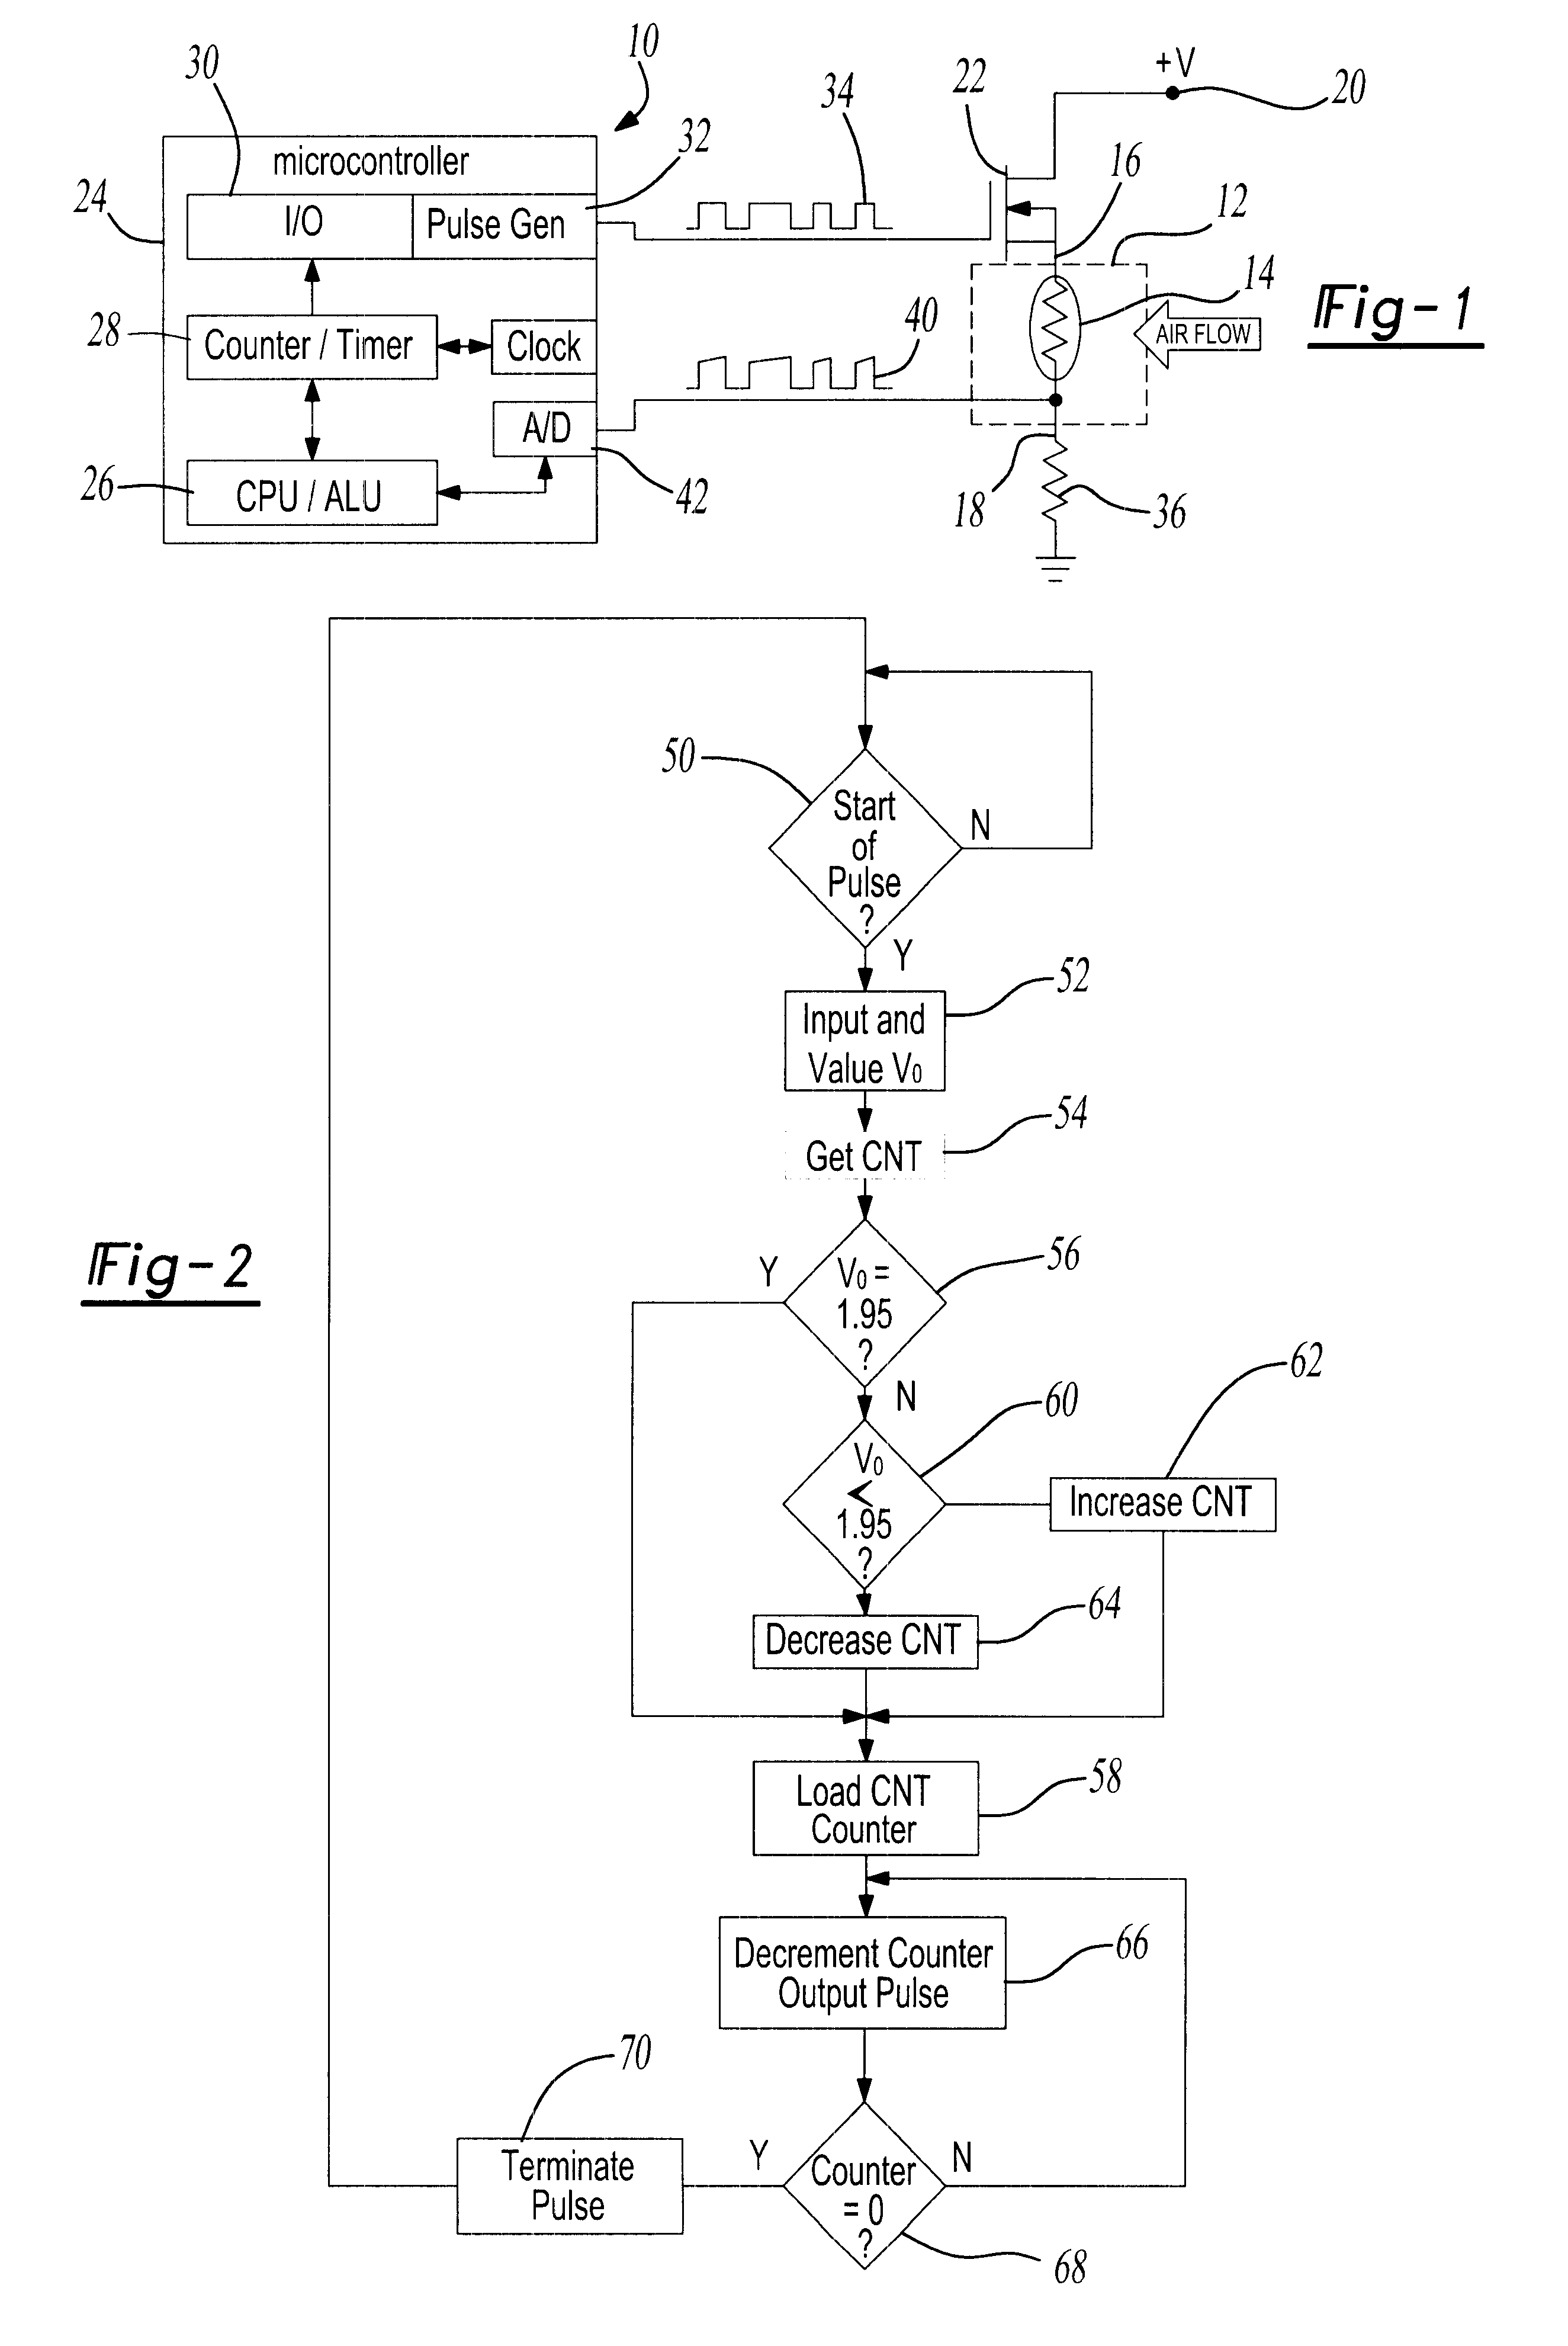 Time domain measurement and control system for a hot wire air flow sensor